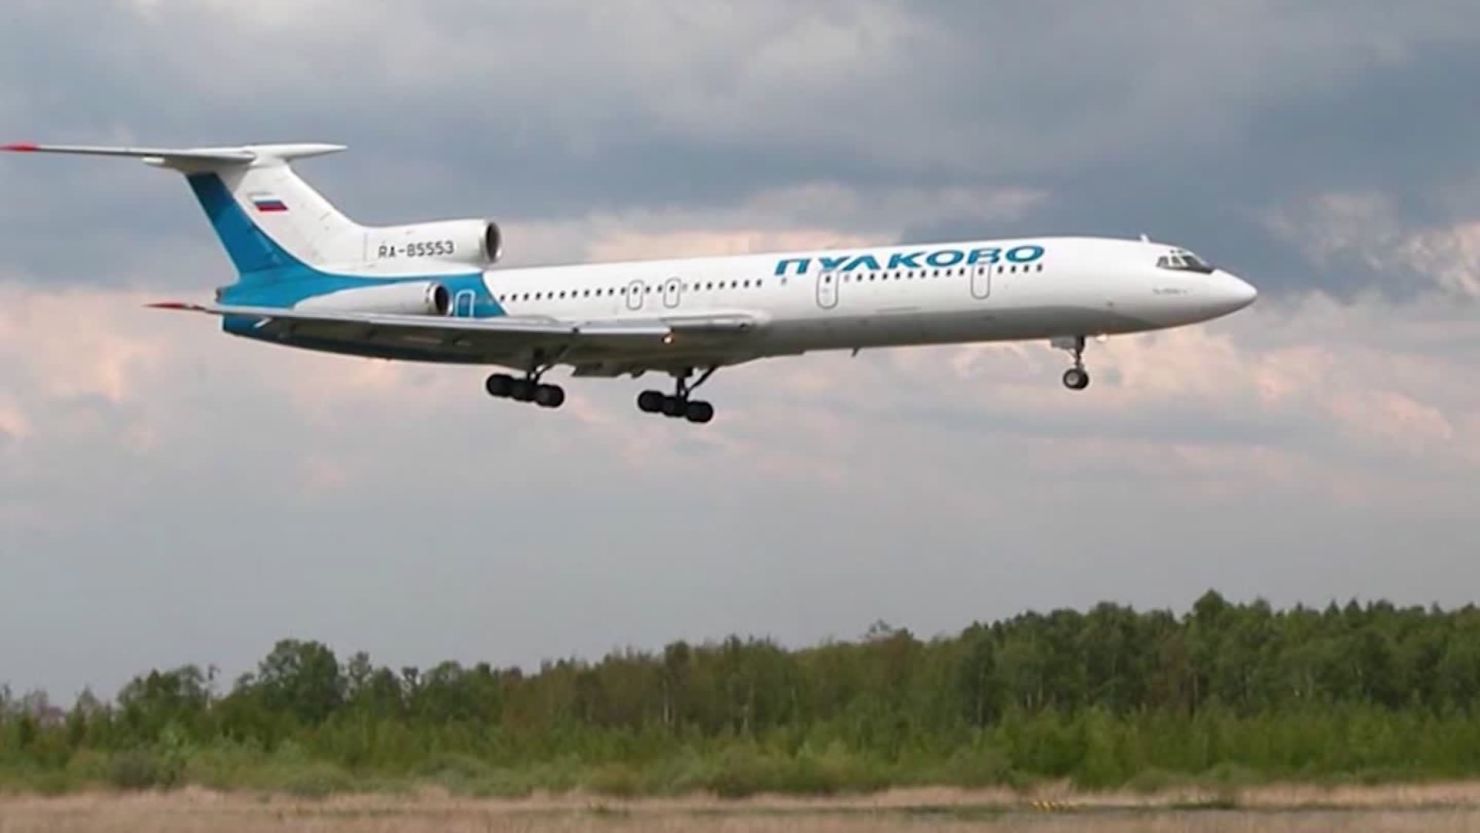 The Tupolev Tu-154 was carrying 84 passengers and eight crew members when it crashed Sunday.